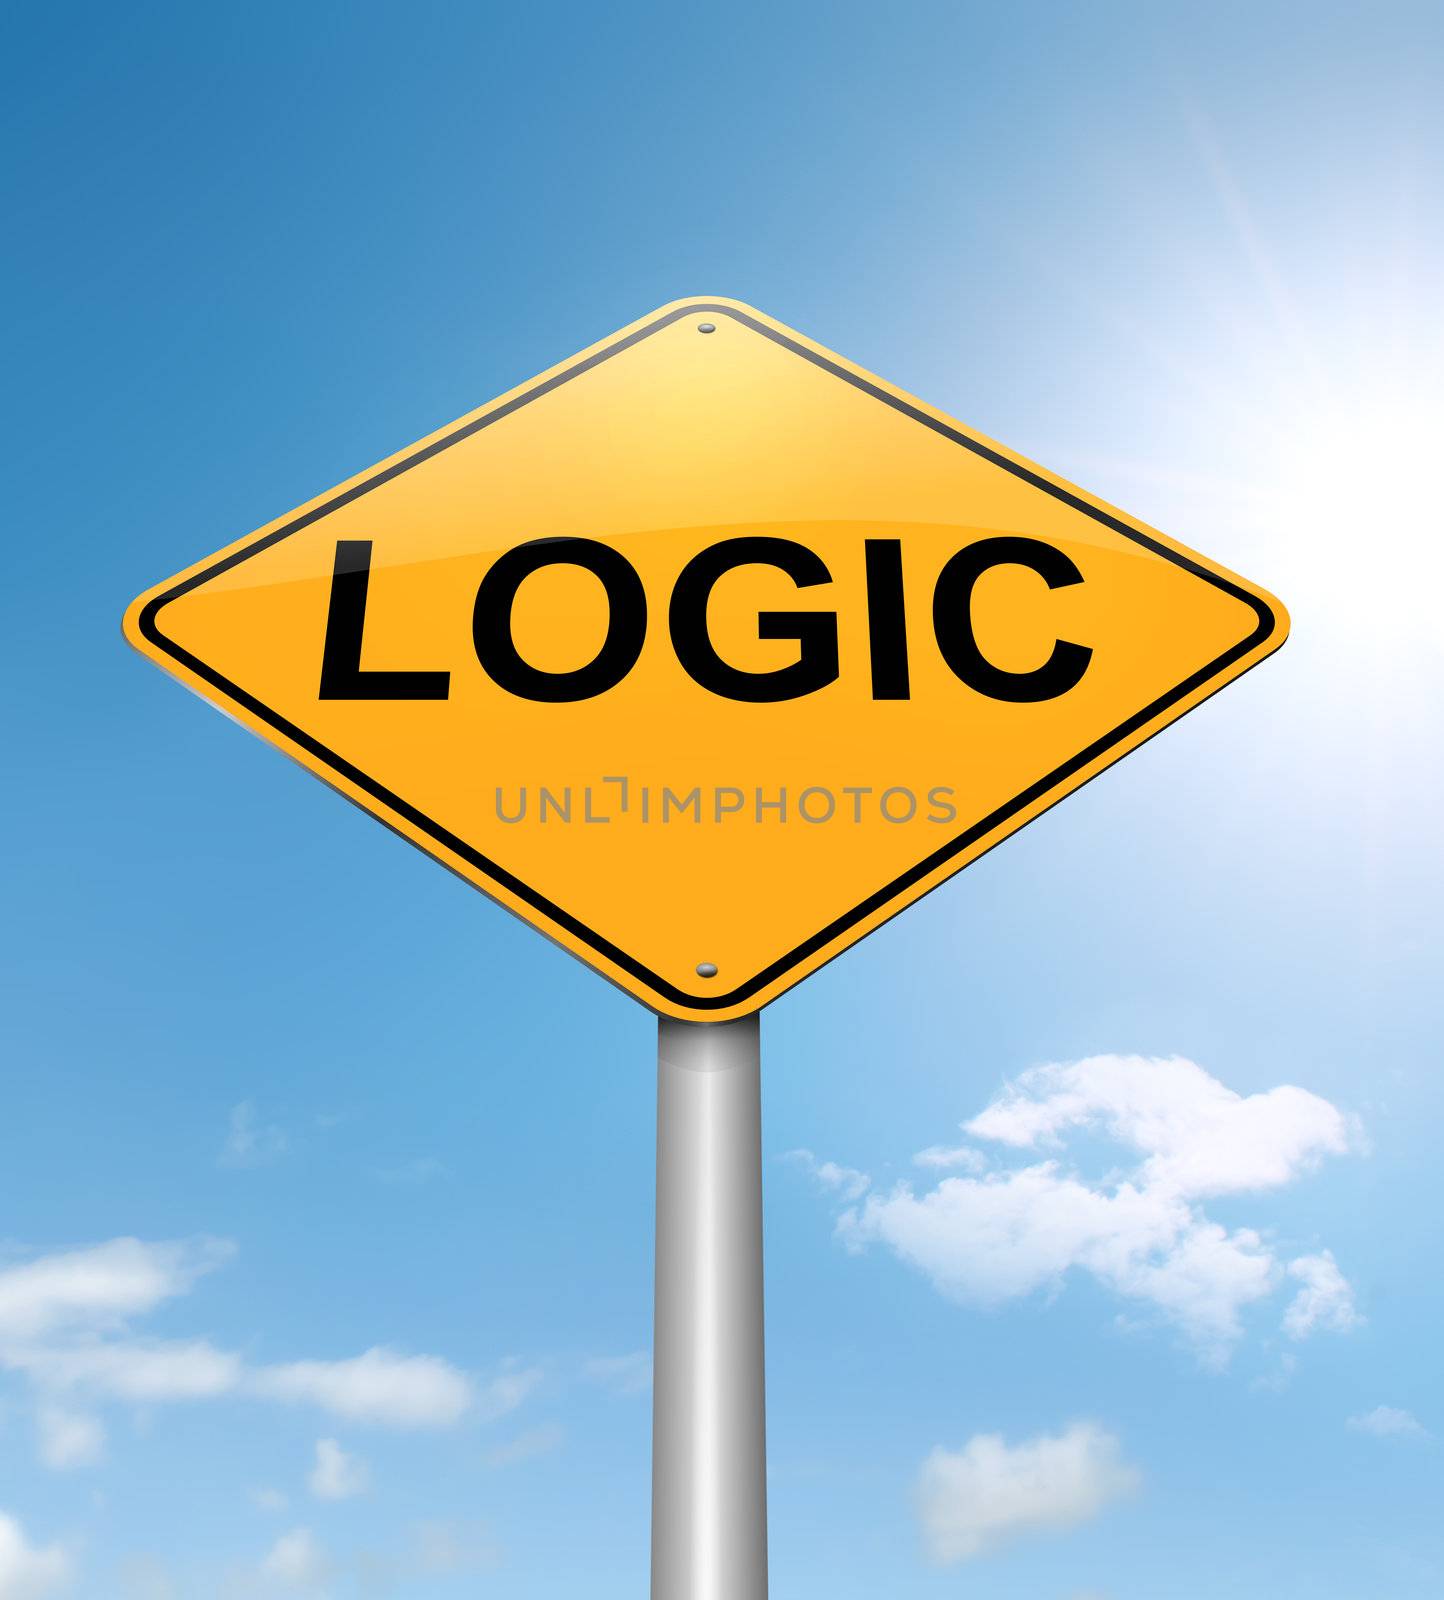 Illustration depicting a roadsign with a logic concept. Sky background.